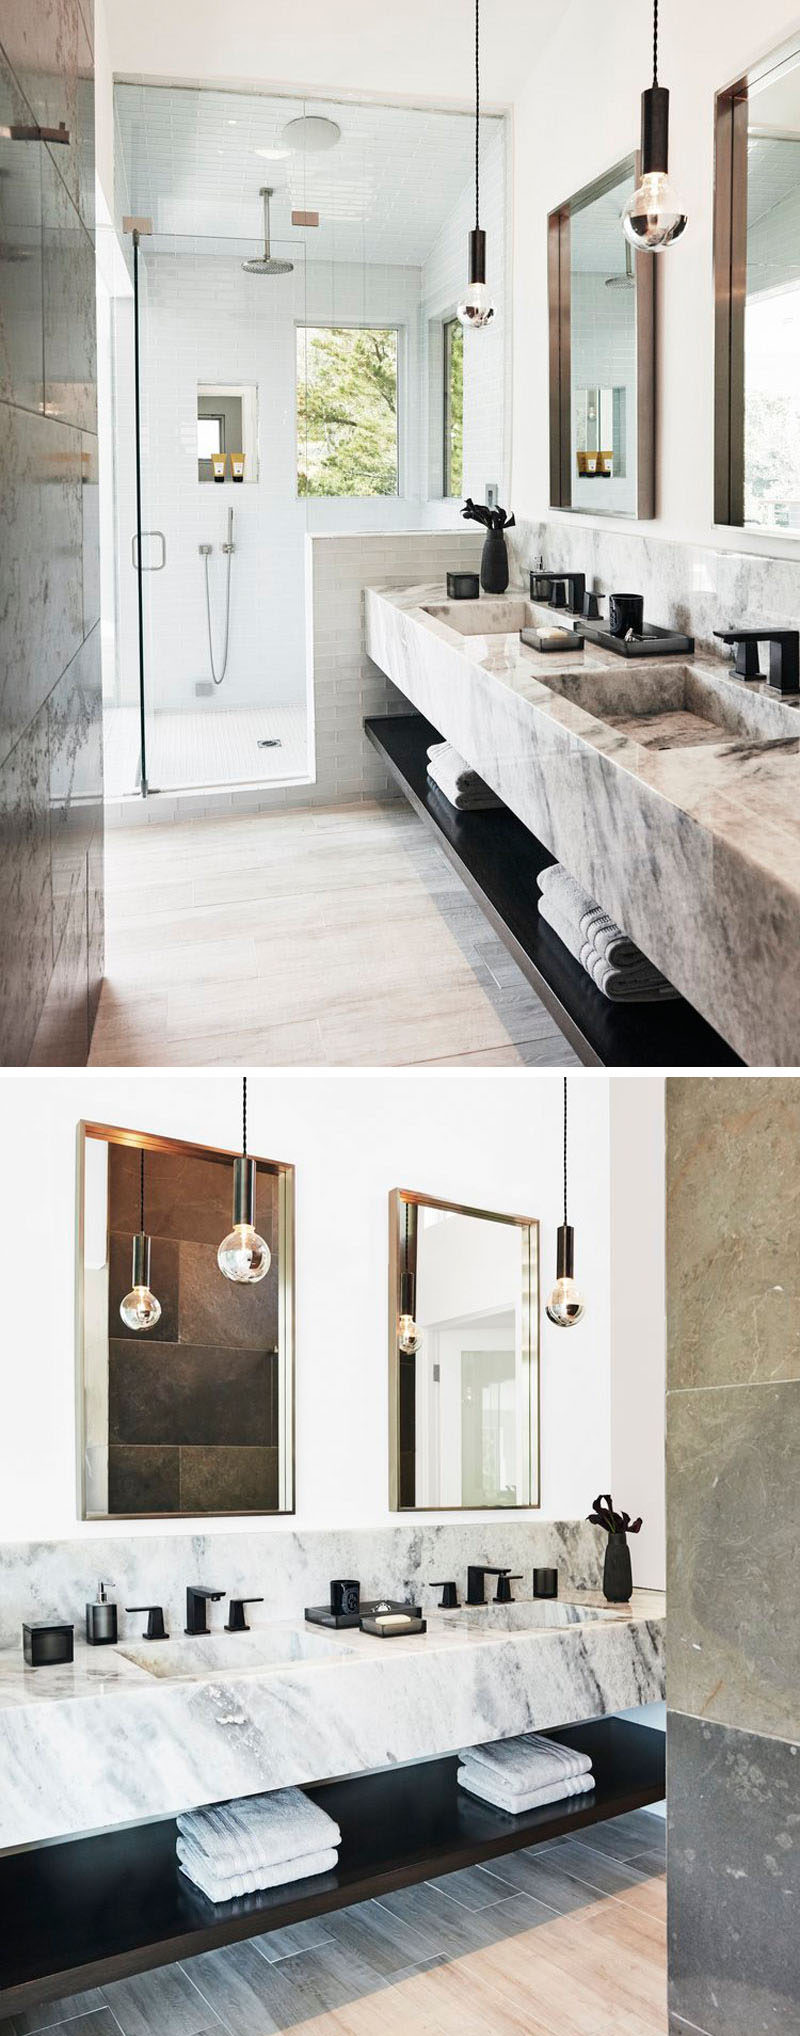 In this master bathroom, there's an oversized steam shower and a custom dual vanity made from marble.